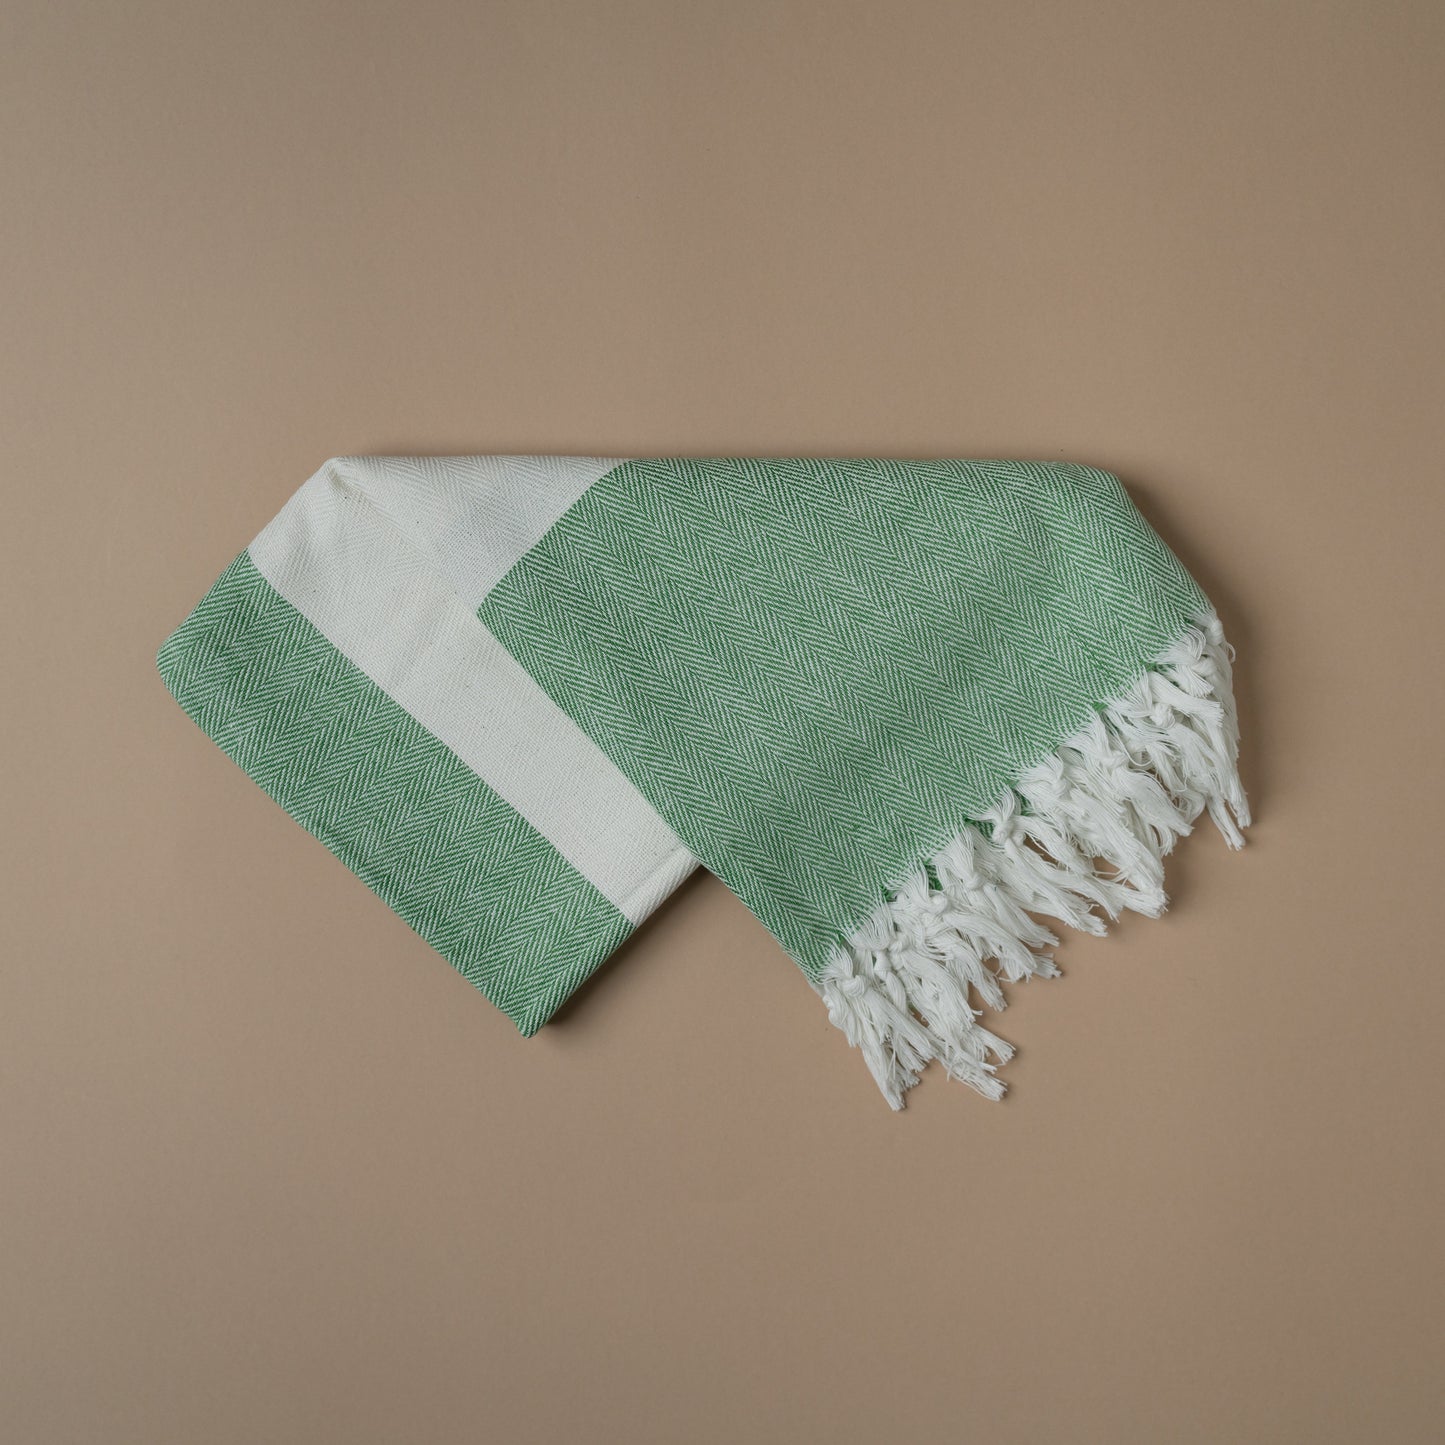 Eco-Friendly Organic Bath Towel with Plant-Based Dyes • Tulasi green •